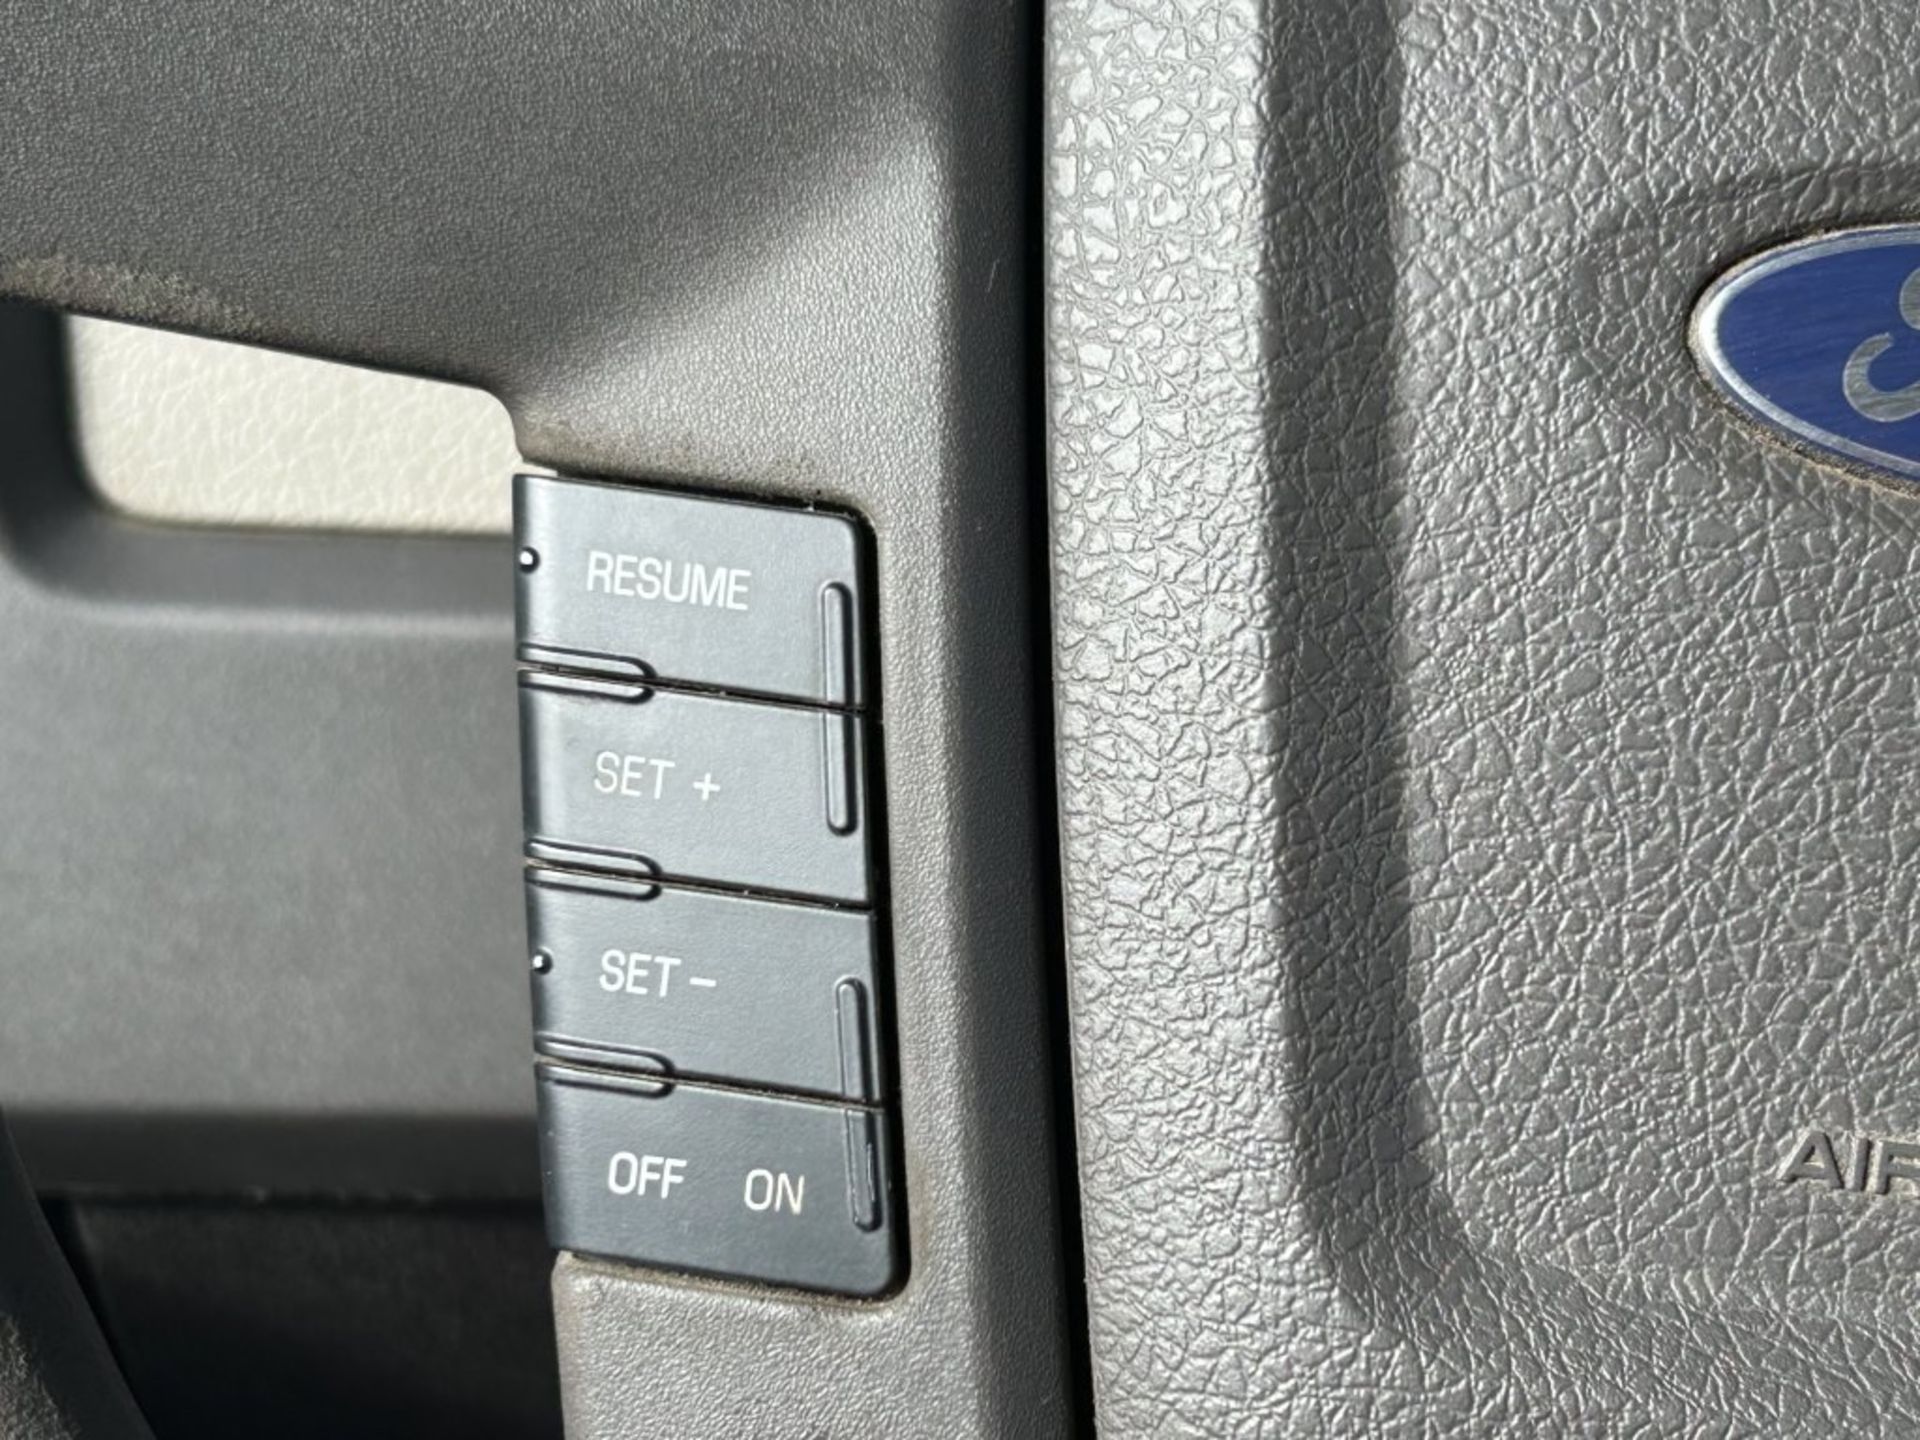 2010 Ford F150 XLT 4x4 Extra Cab Pickup - Image 26 of 42